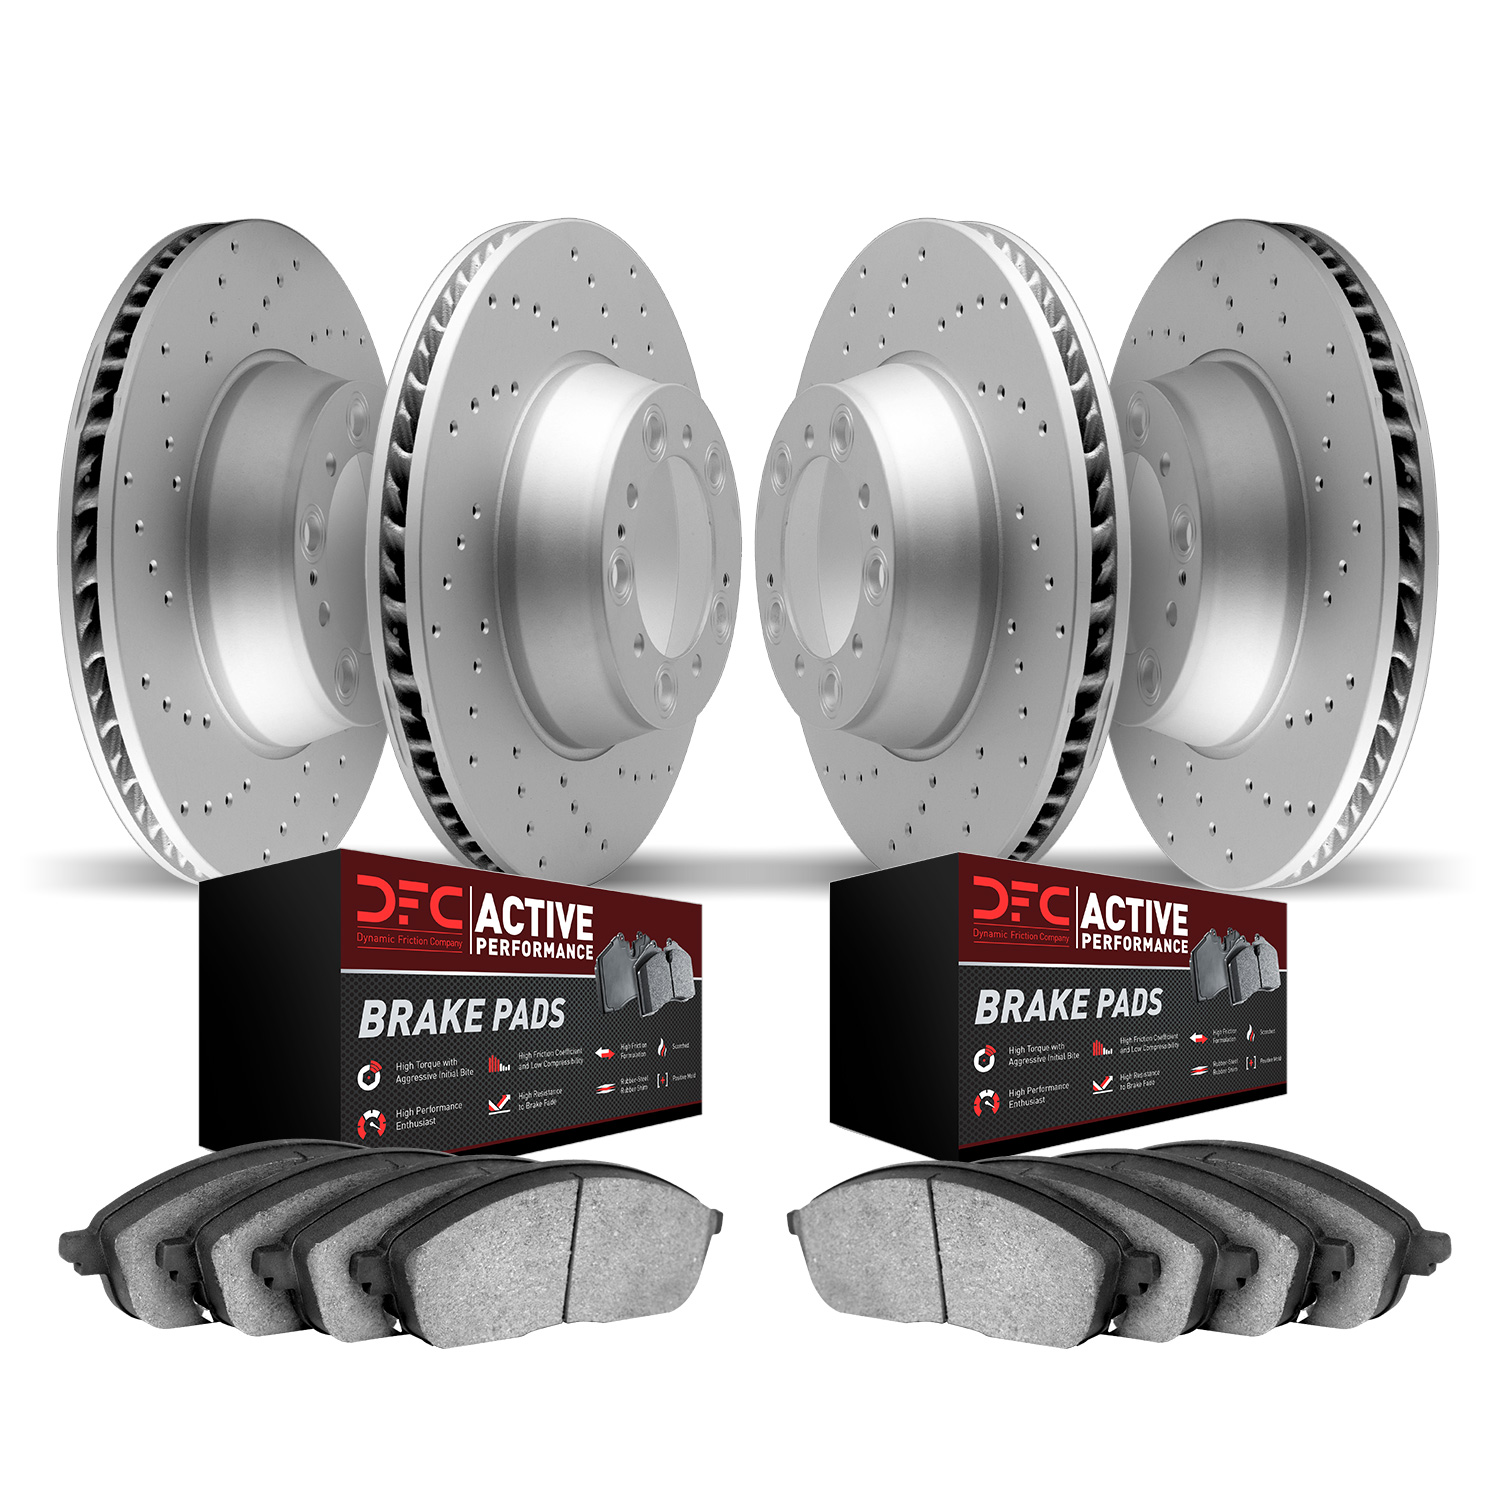 2704-45005 Geoperformance Drilled Brake Rotors with Active Performance Pads Kit, 2015-2017 GM, Position: Front and Rear